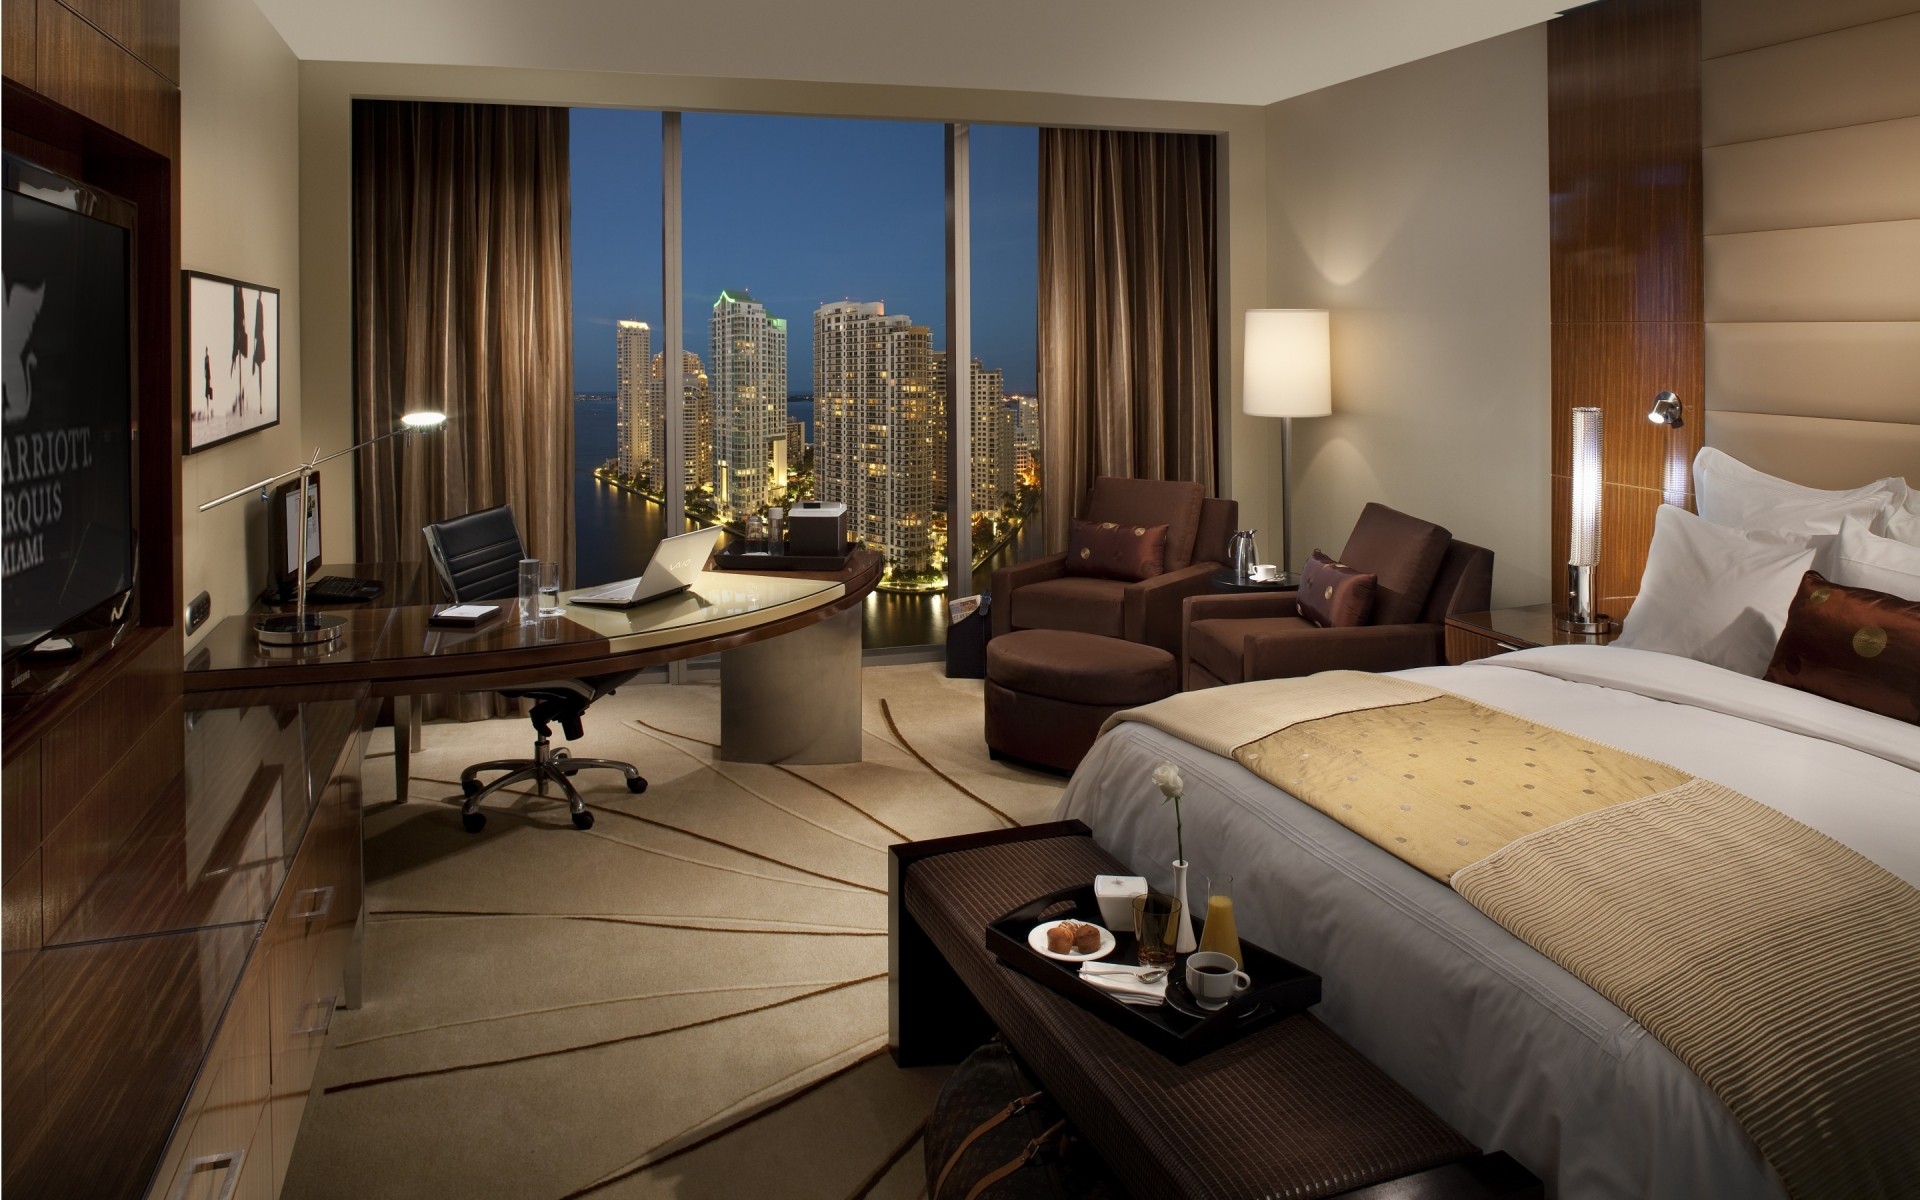 Miami Florida Hotel Room Android Wallpapers